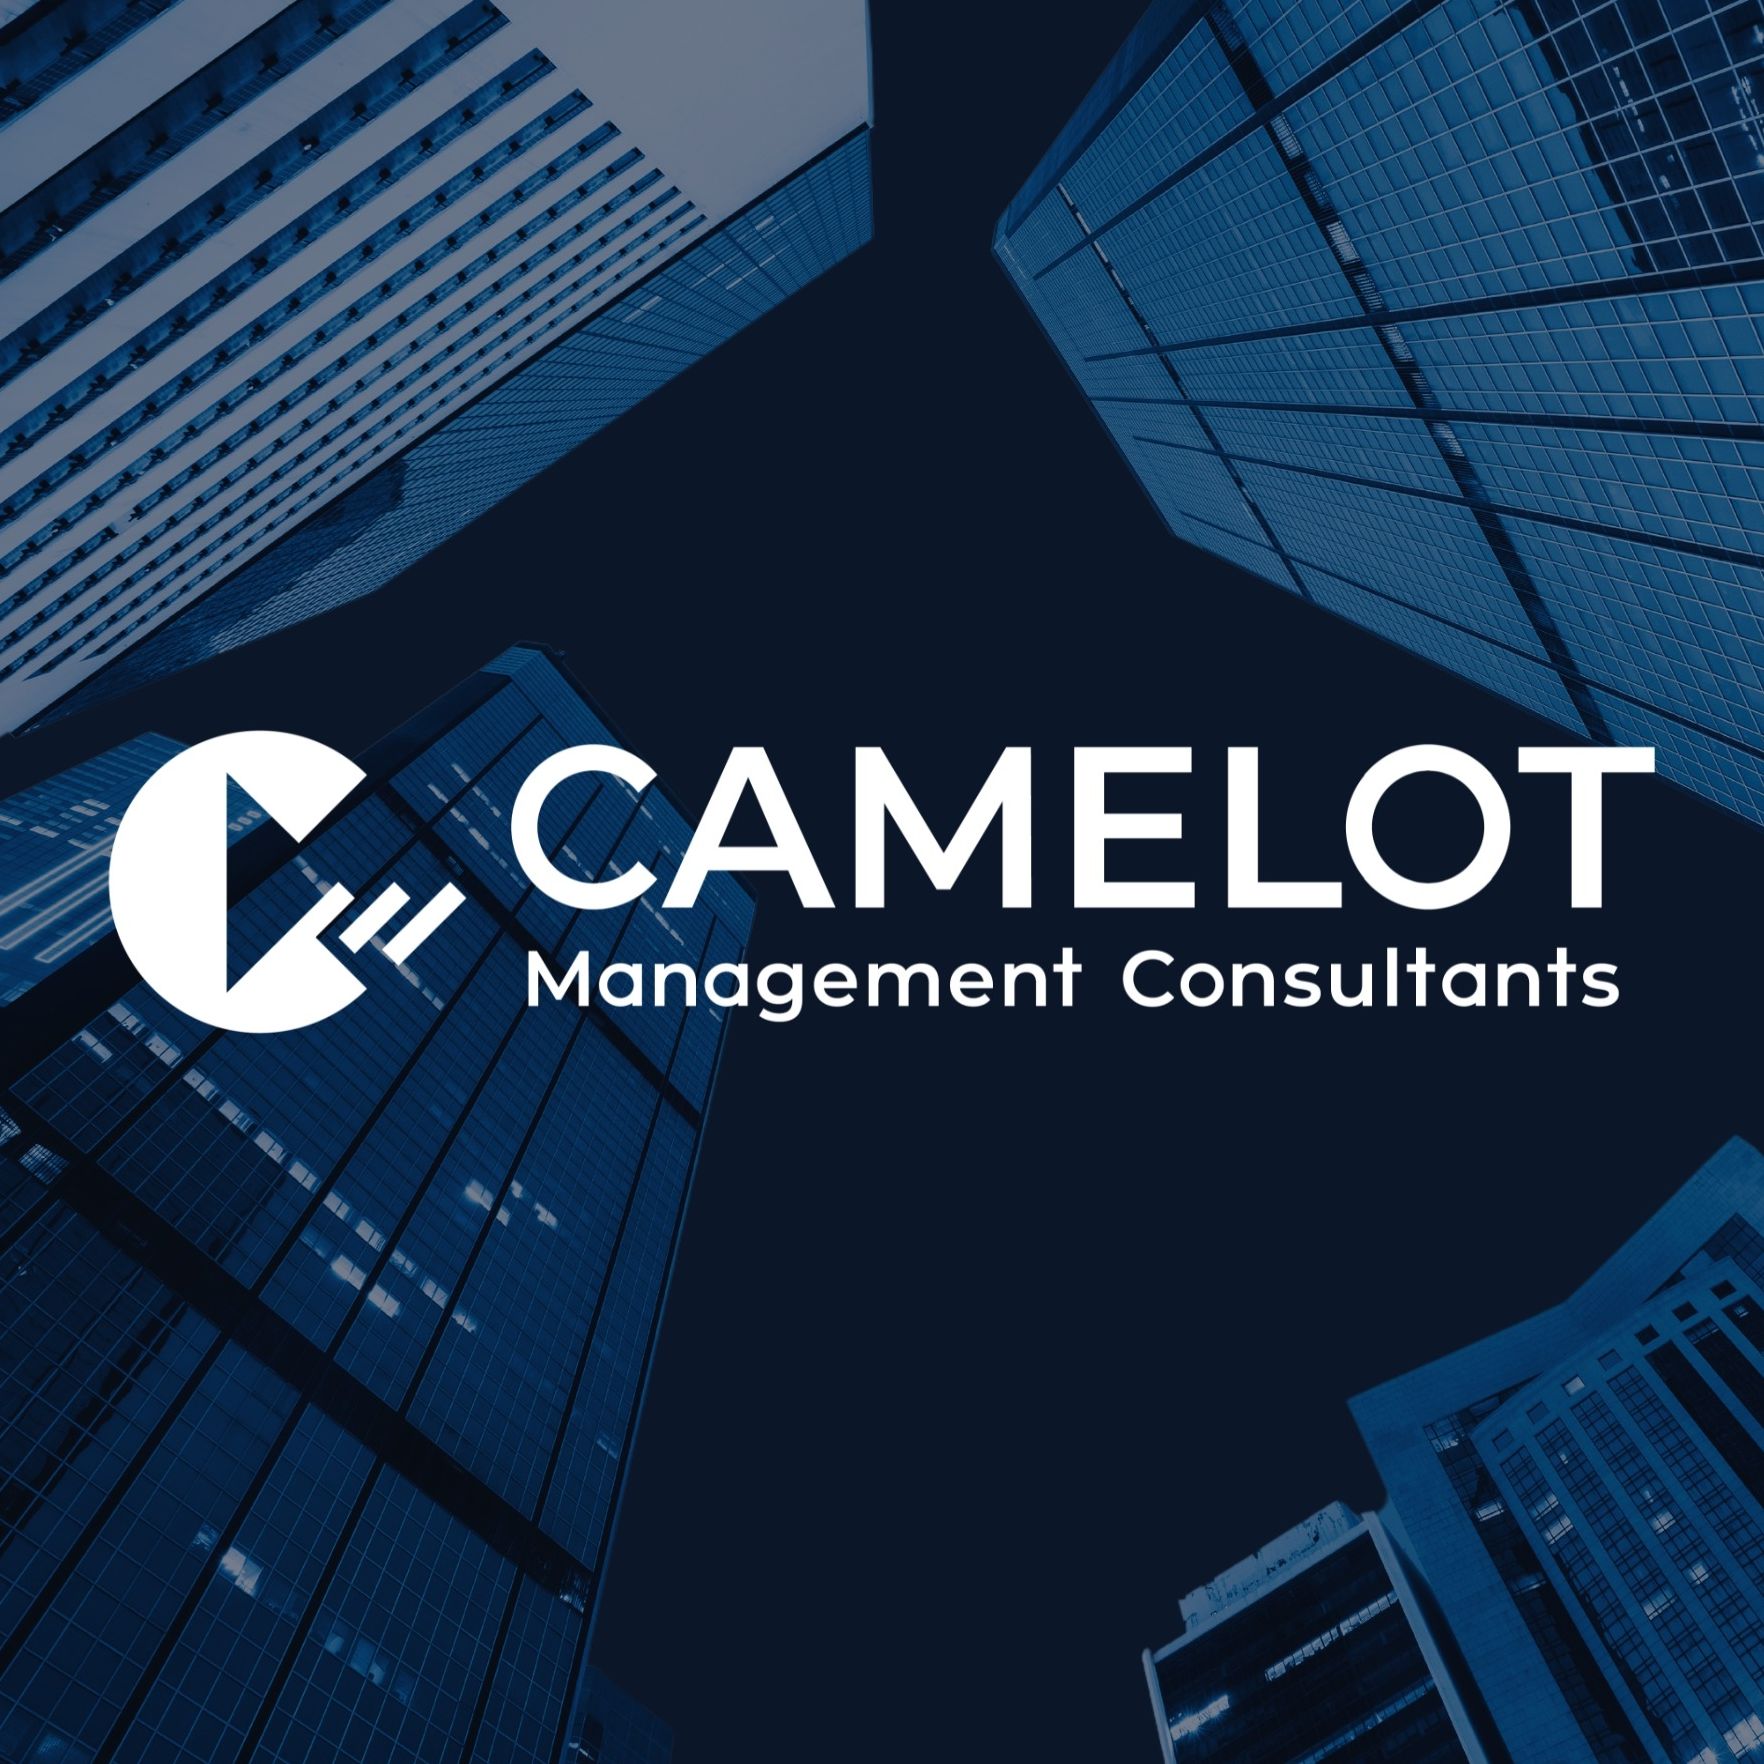 Camelot ITLab